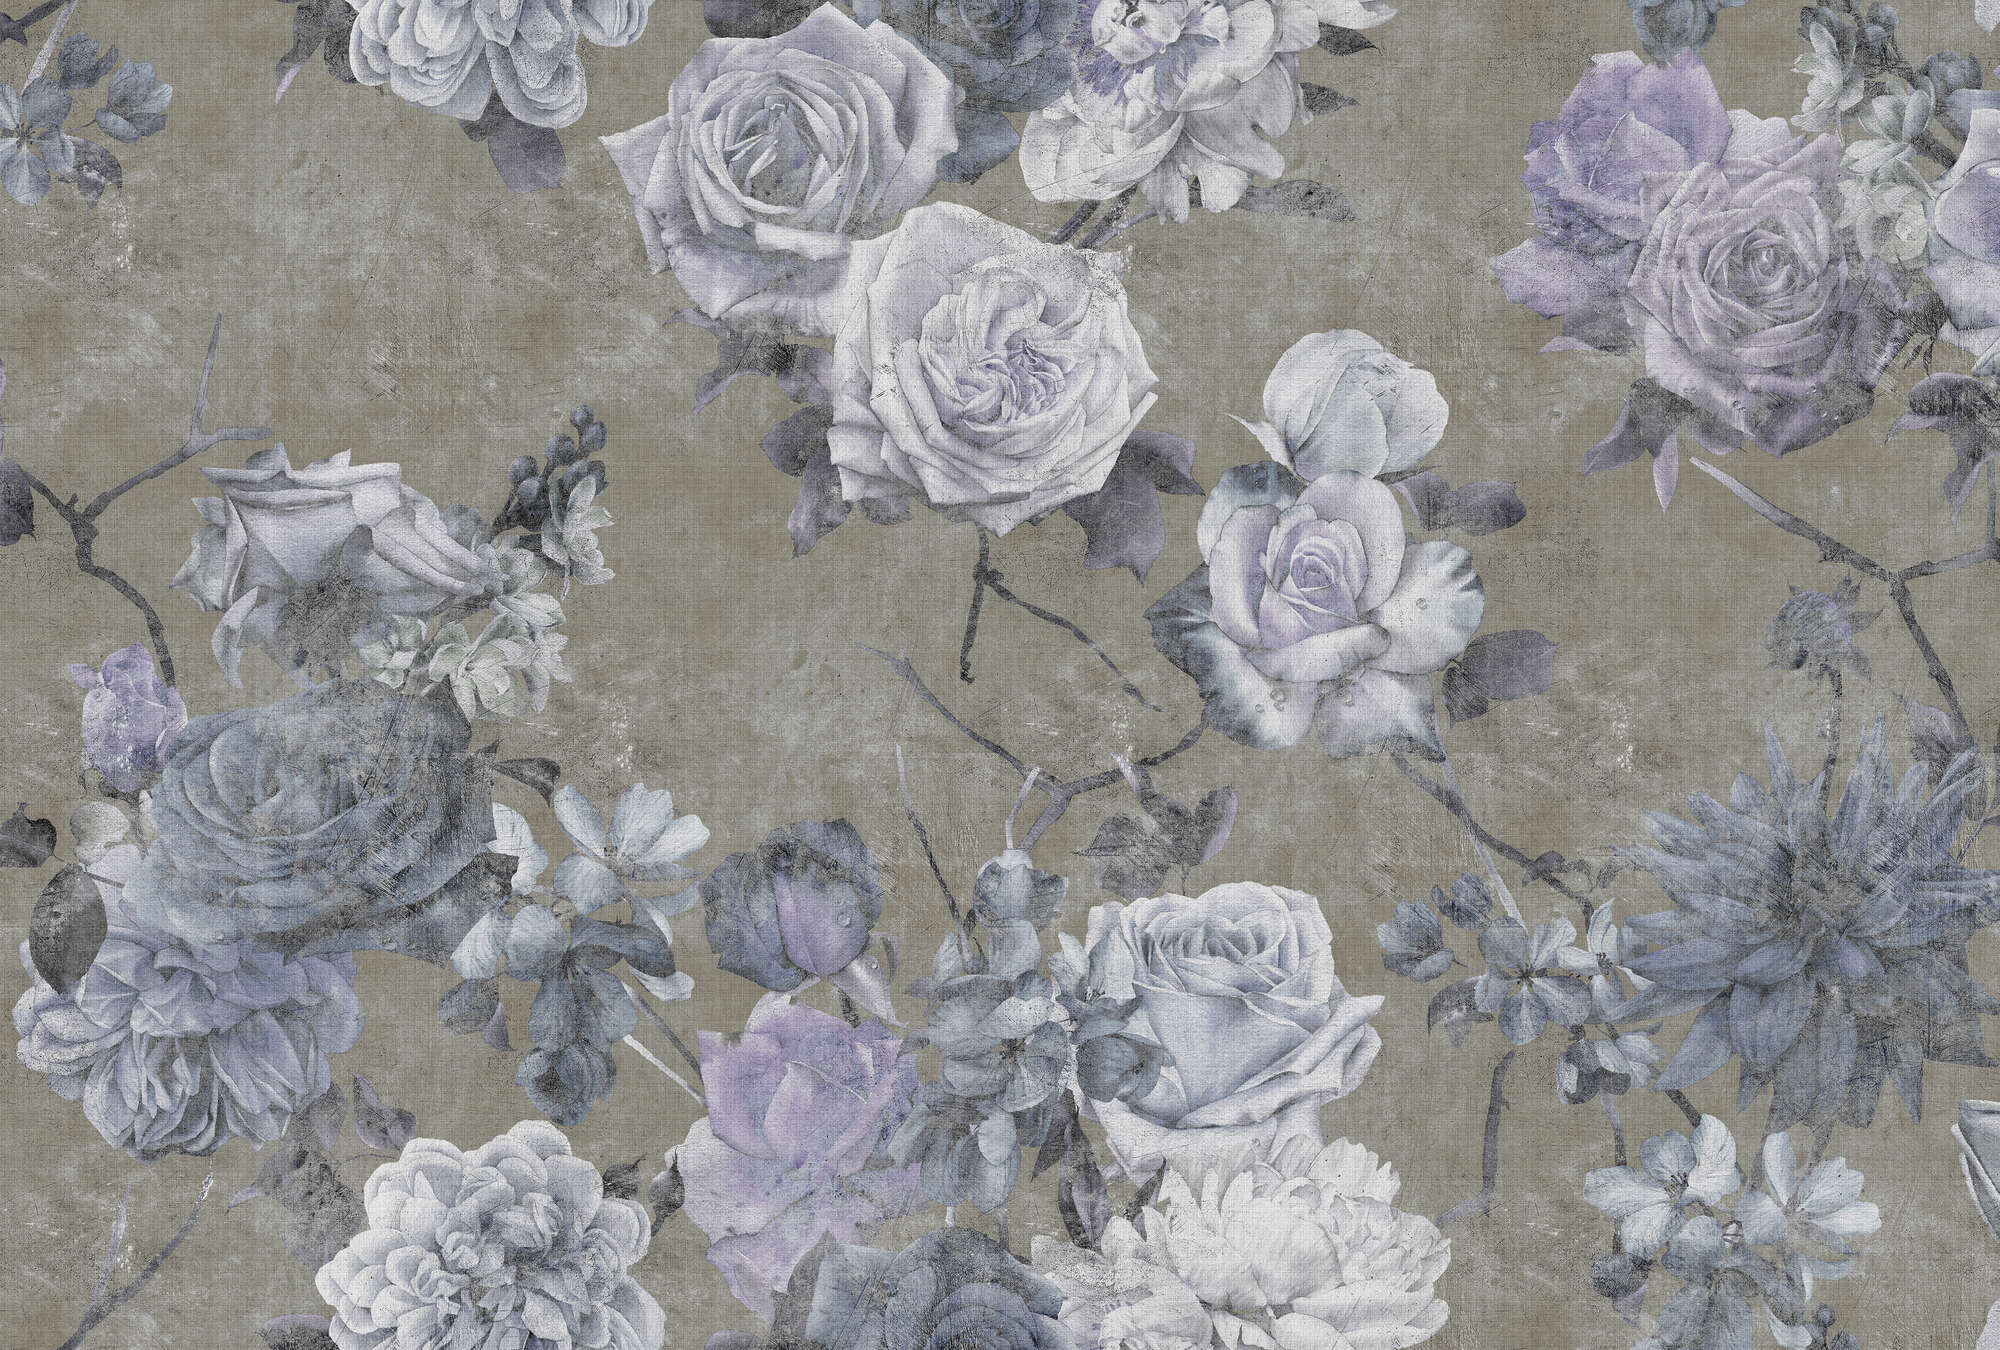             Sleeping Beauty 1 - Wallpaper in natural linen structure rose blossoms in used look - blue, taupe | mother-of-pearl smooth fleece
        